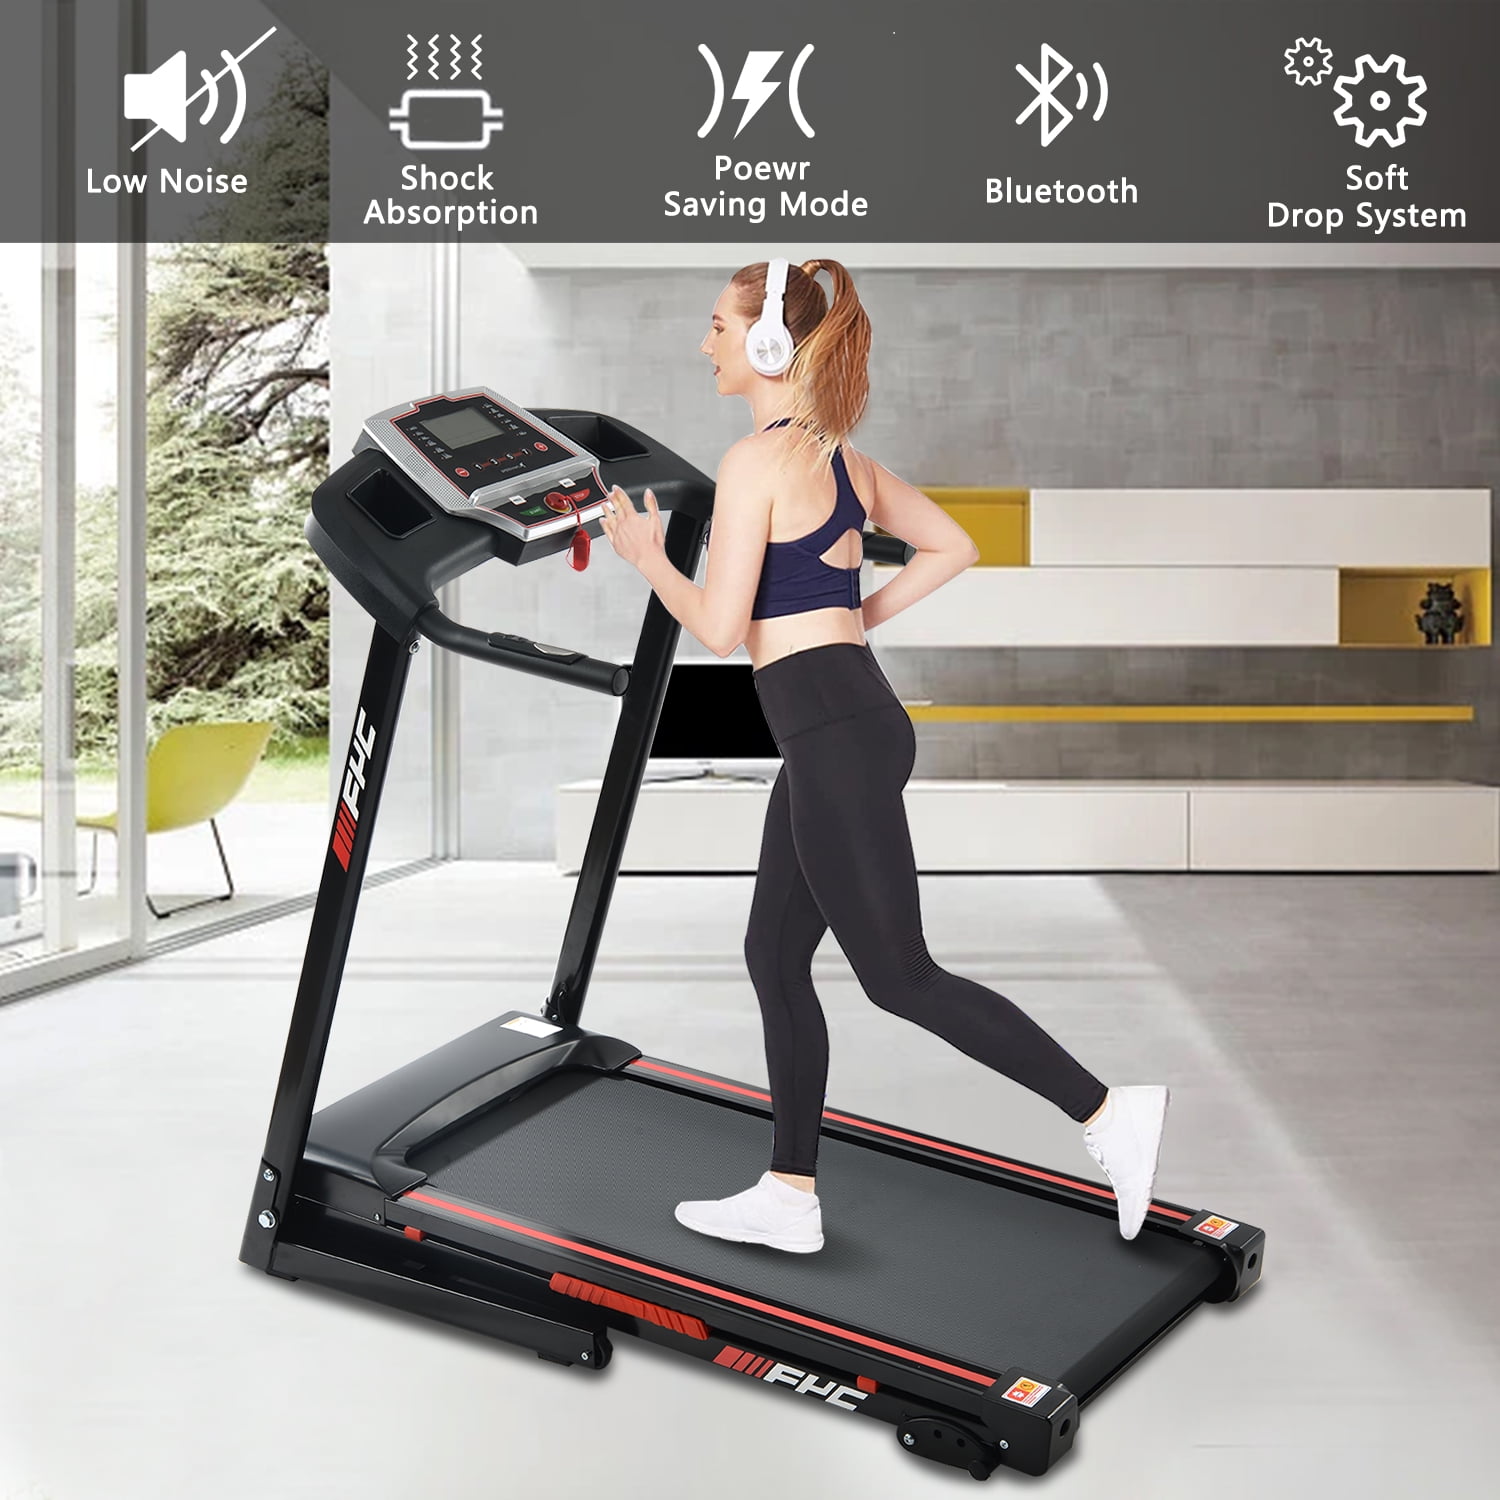 Details about   Folding Manual Treadmill Portable Walking Machine Incline Cardio Exercise USA 